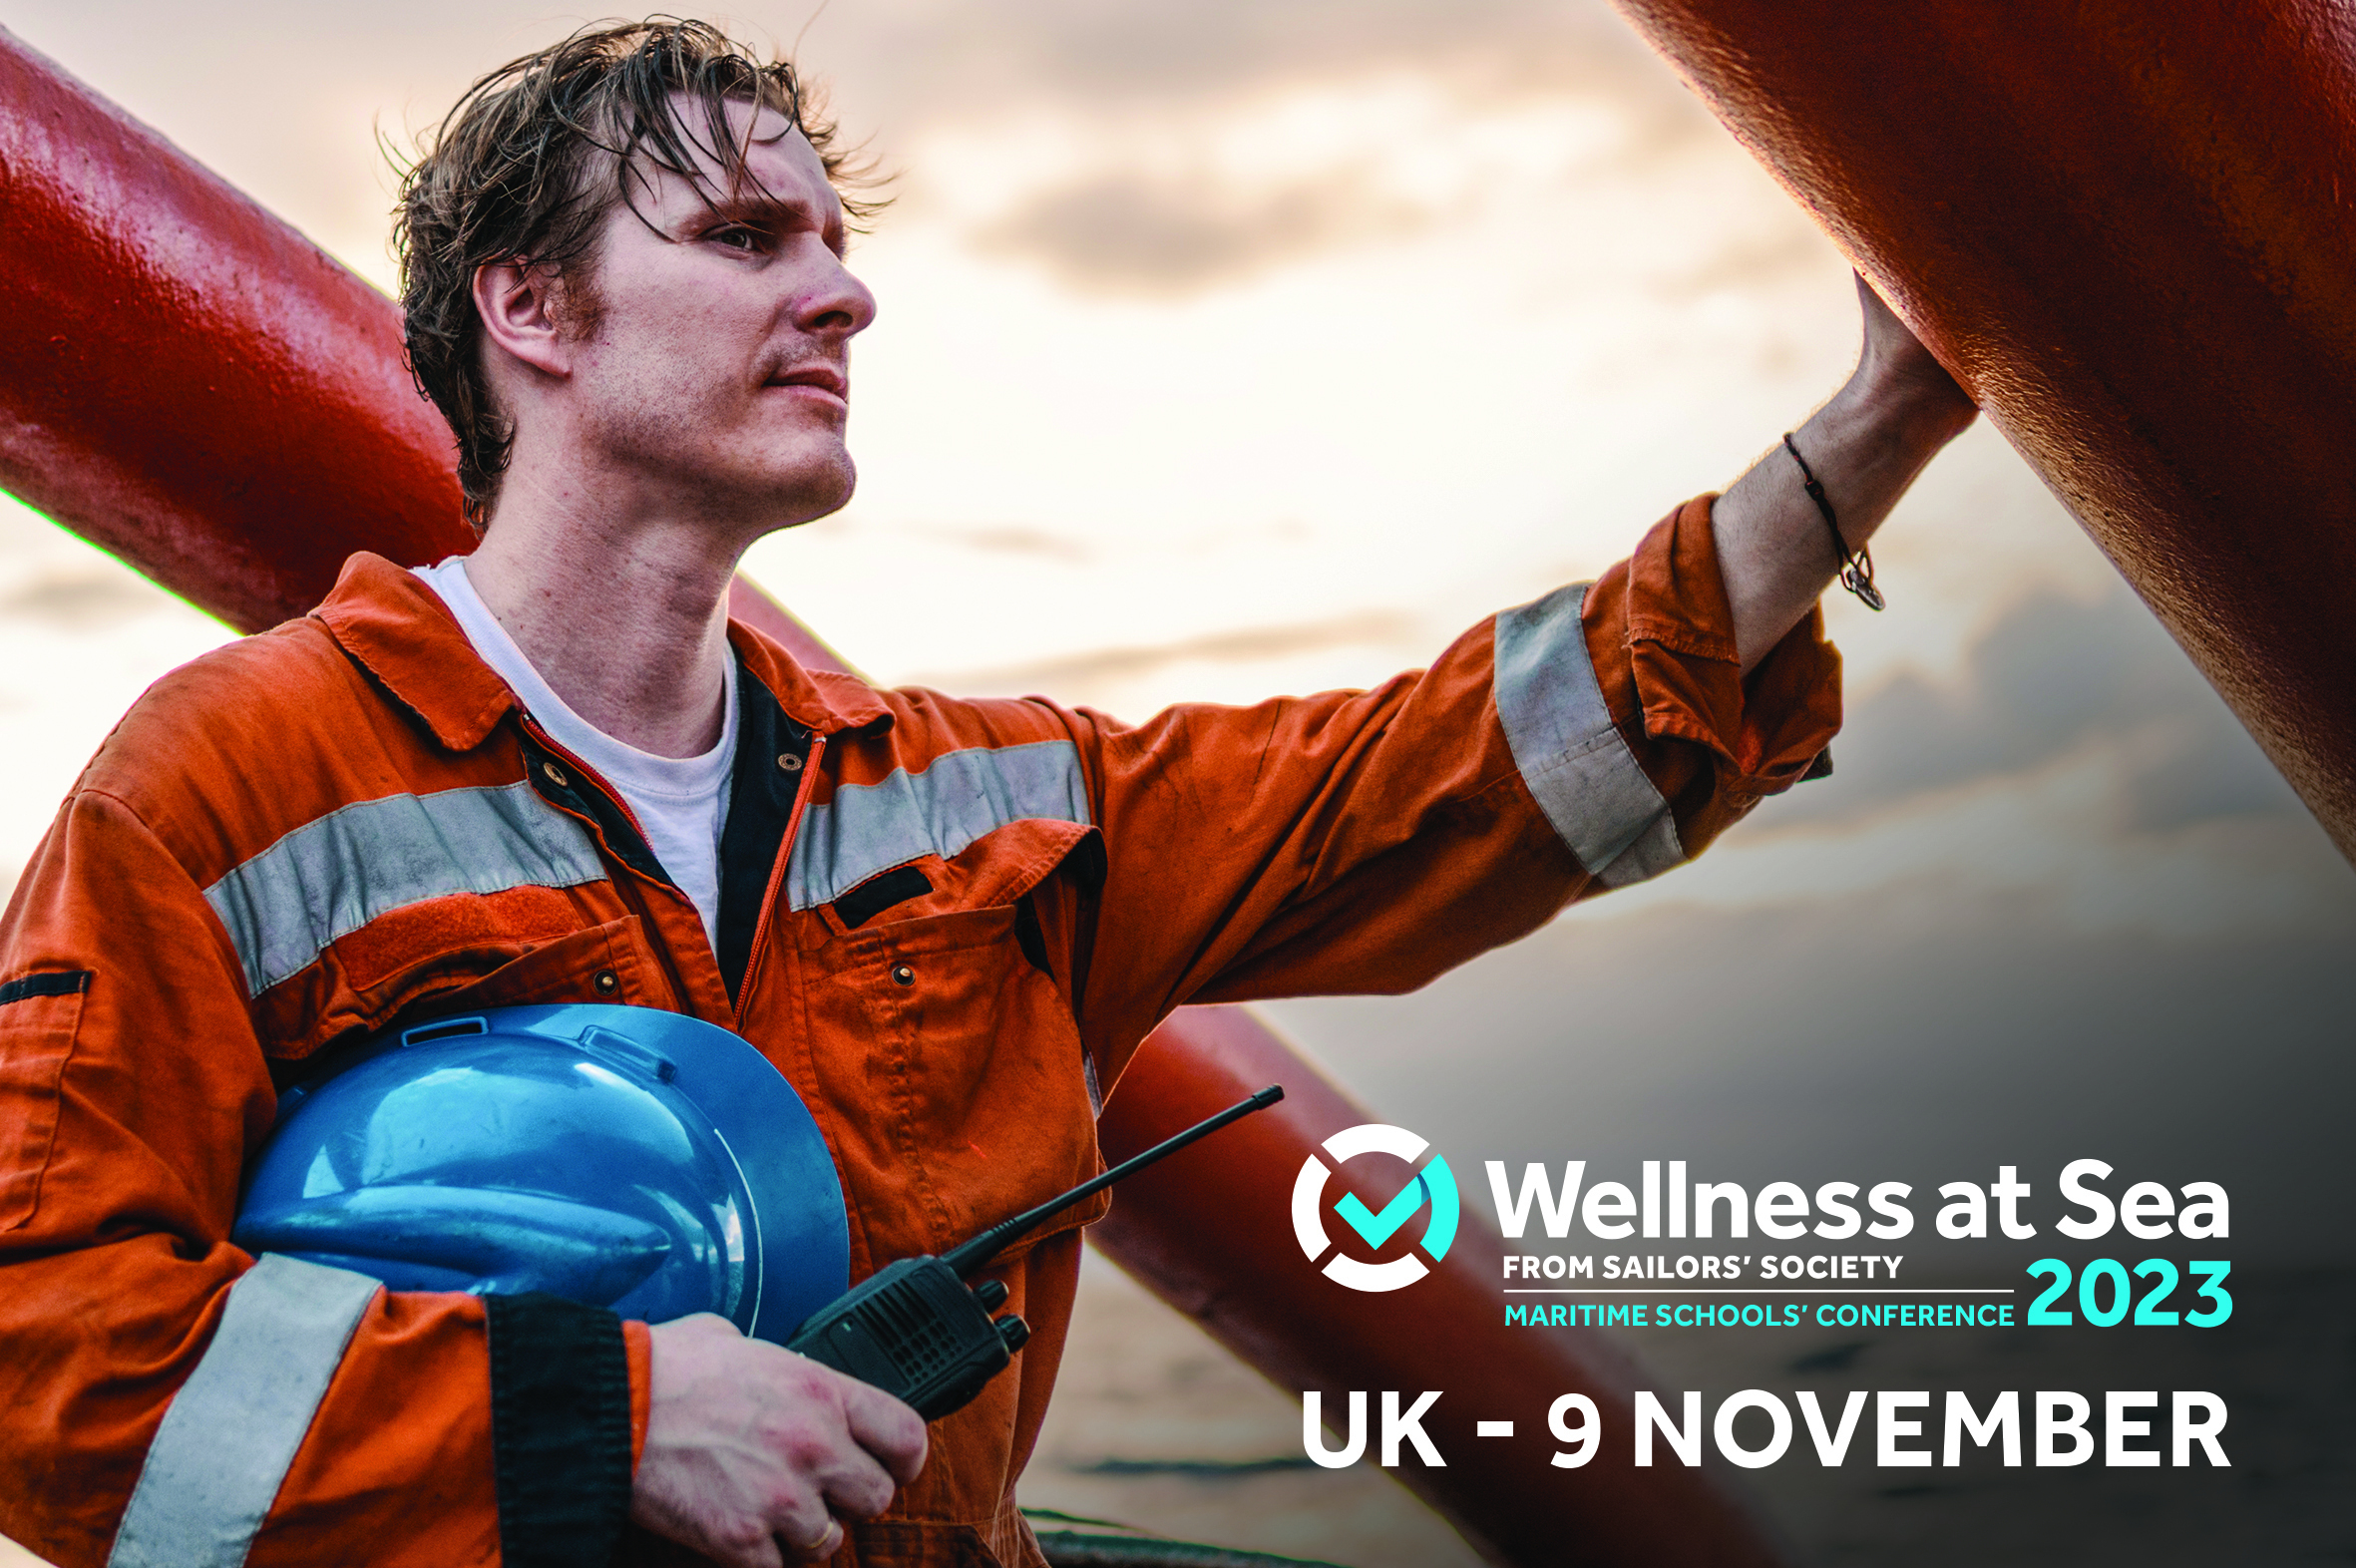 UK Gen Z seafarers get their first Wellness at Sea cadet conference